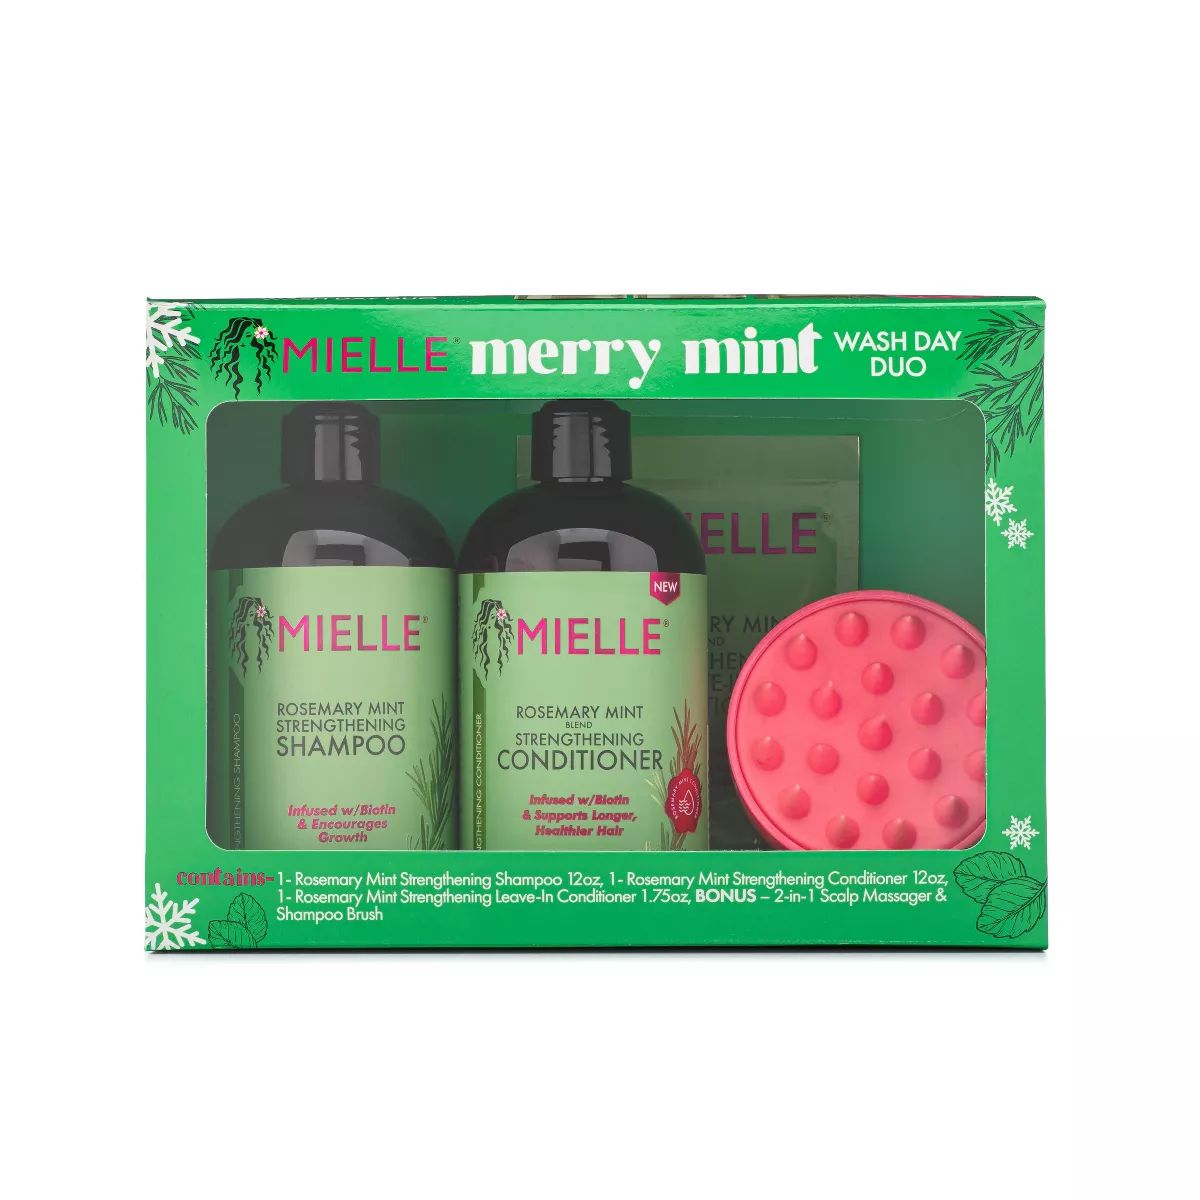 Mielle Organics Rosemary Mint & Merry Mint Shampoo & Conditioner Holiday Wash Day Duo Gift Set - ... | Target